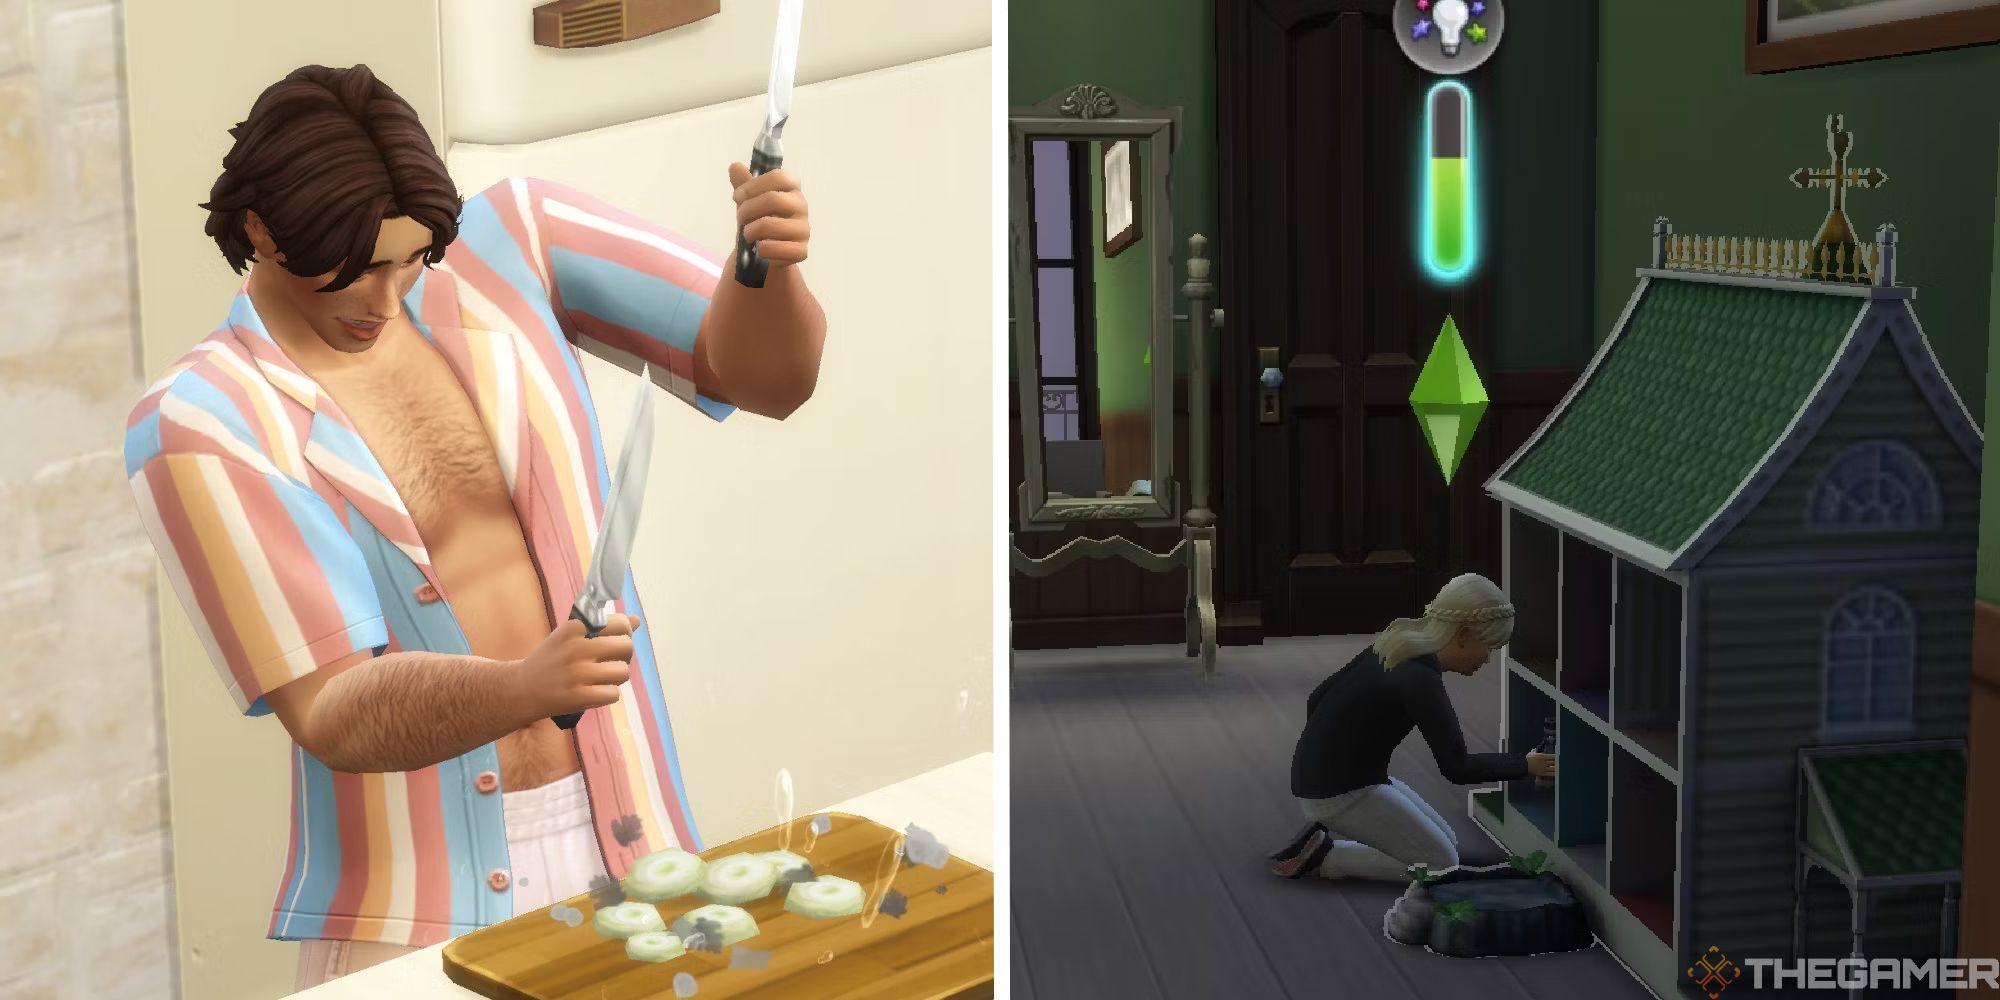 sims 4 split image of sim cooking next to image of child playing at a dollhouse